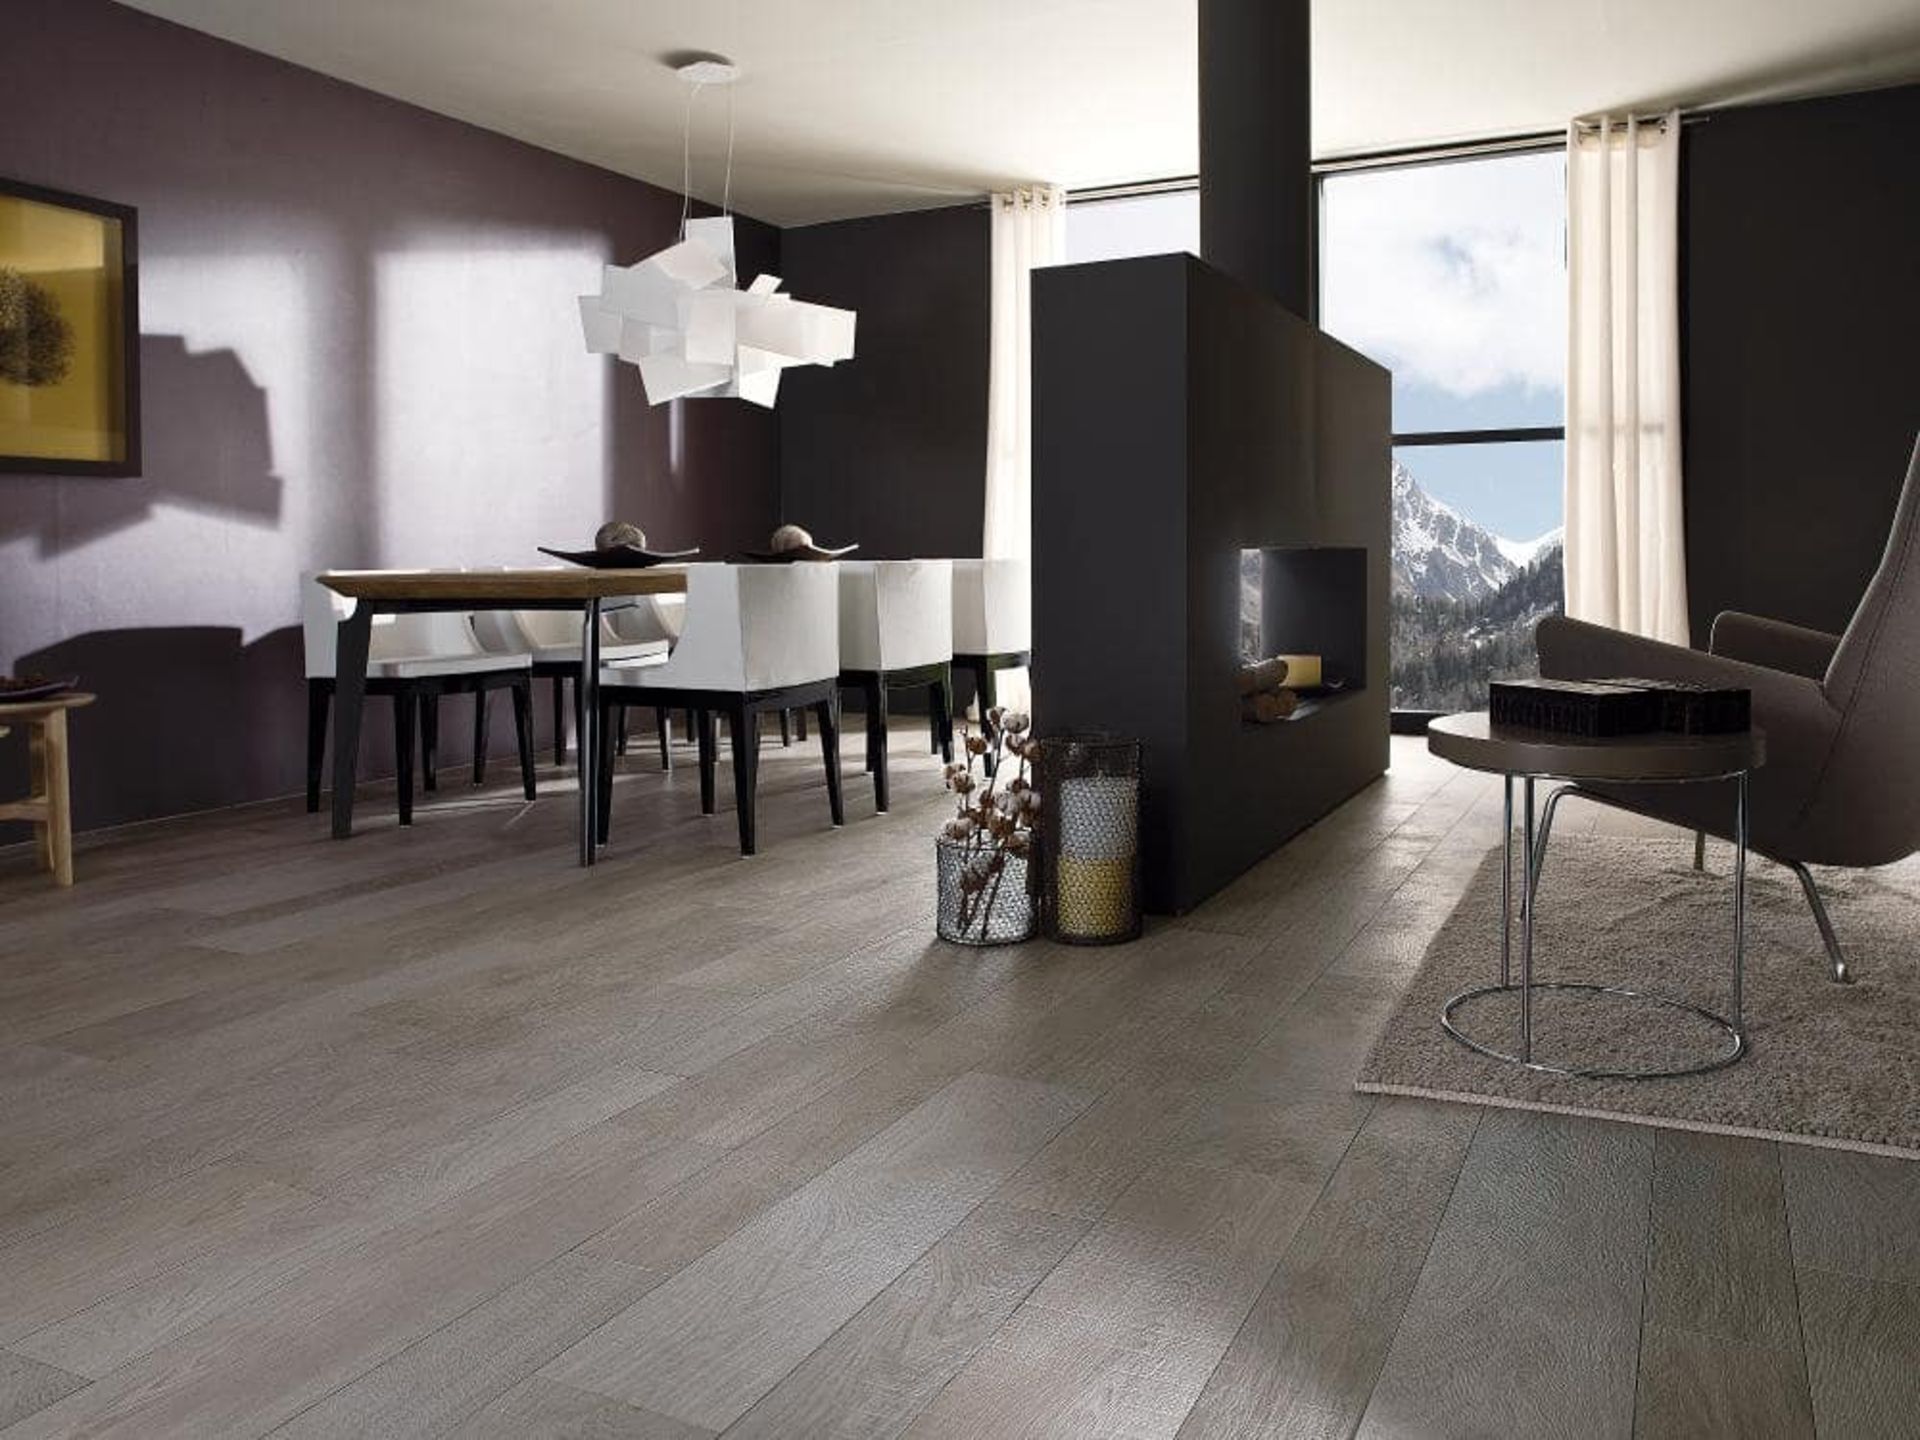 New 5.34M2 Porcelanosa Zoc Oxford Anthracite Wall And Floor Tiles. 10x44.3cm Per Tile. 0.89M2 P...